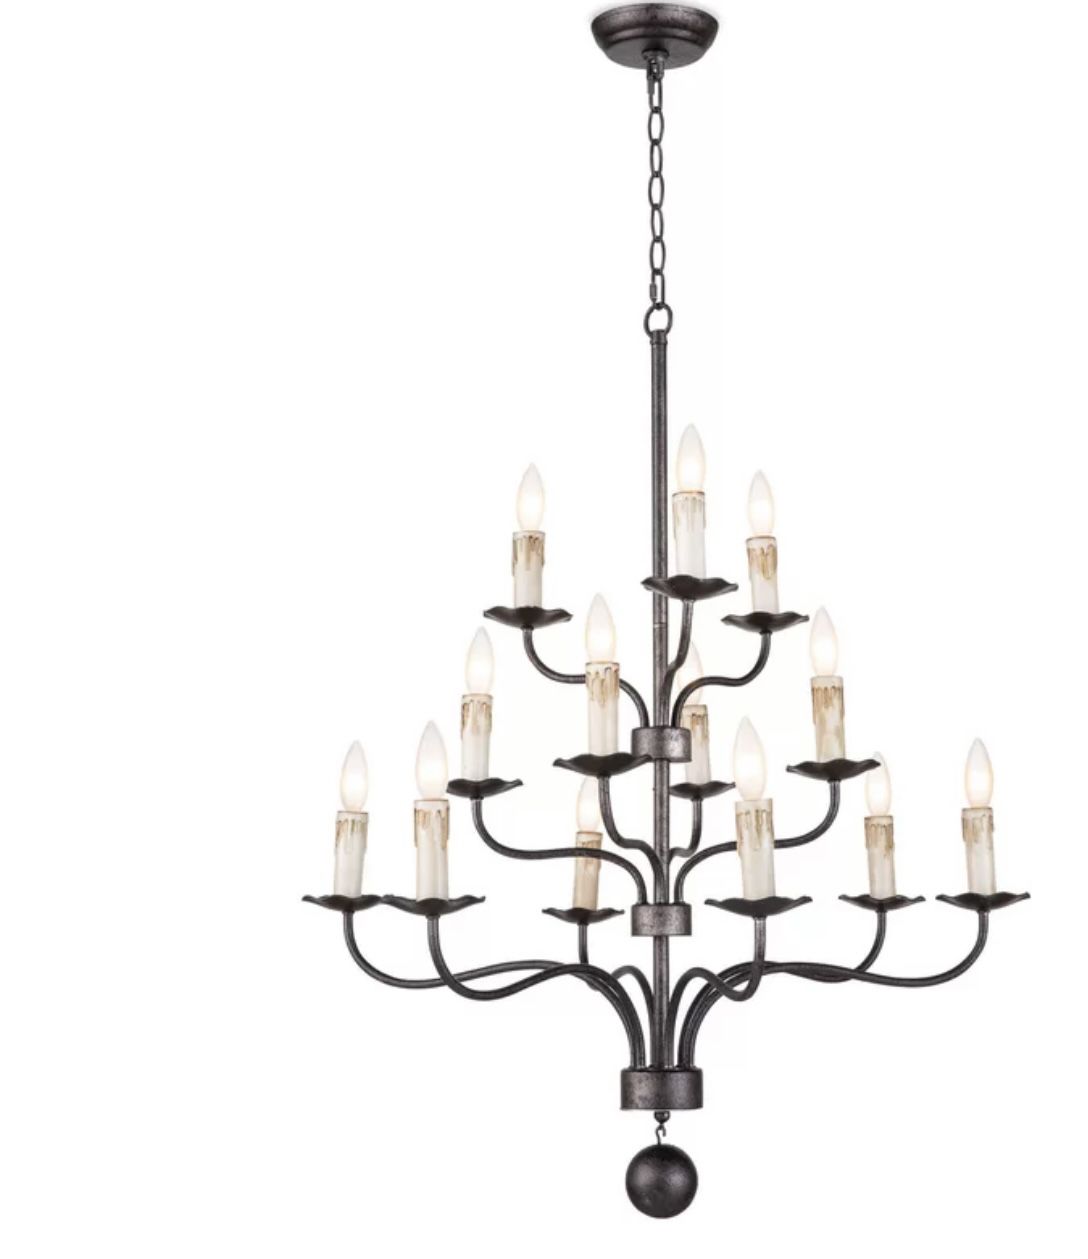 Coastal Living Caden Chandelier by Regina Andrew. New open box inspected. Fixture: 35'' H X 28'' W X 28'' D. Finish:  Blackened Iron MSRP $1,125.00 Ou